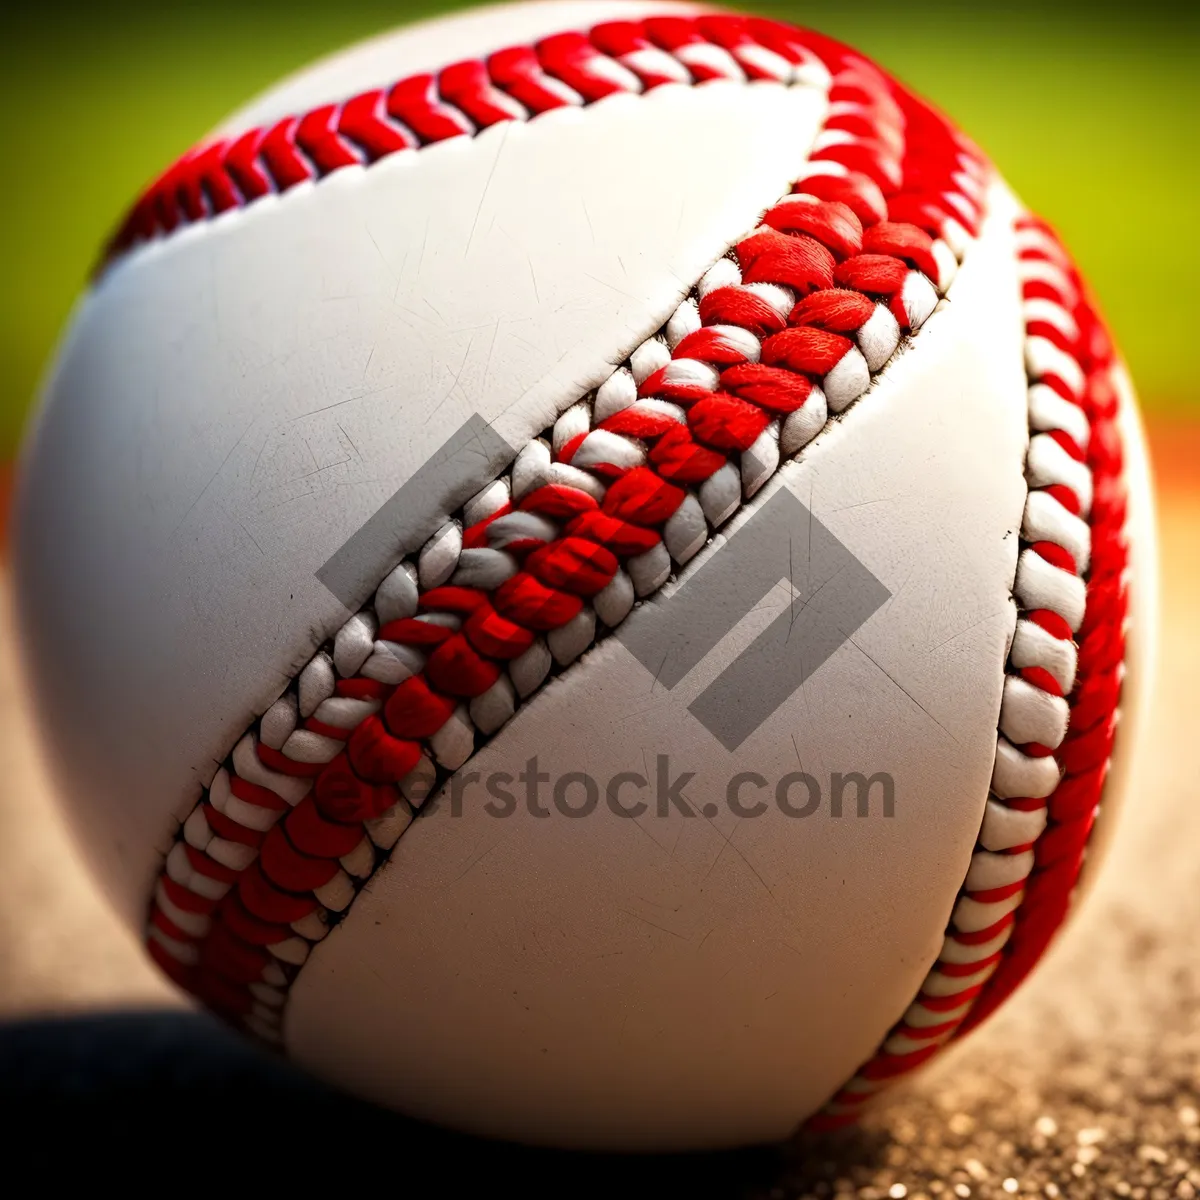 Picture of Baseball glove on grass field.